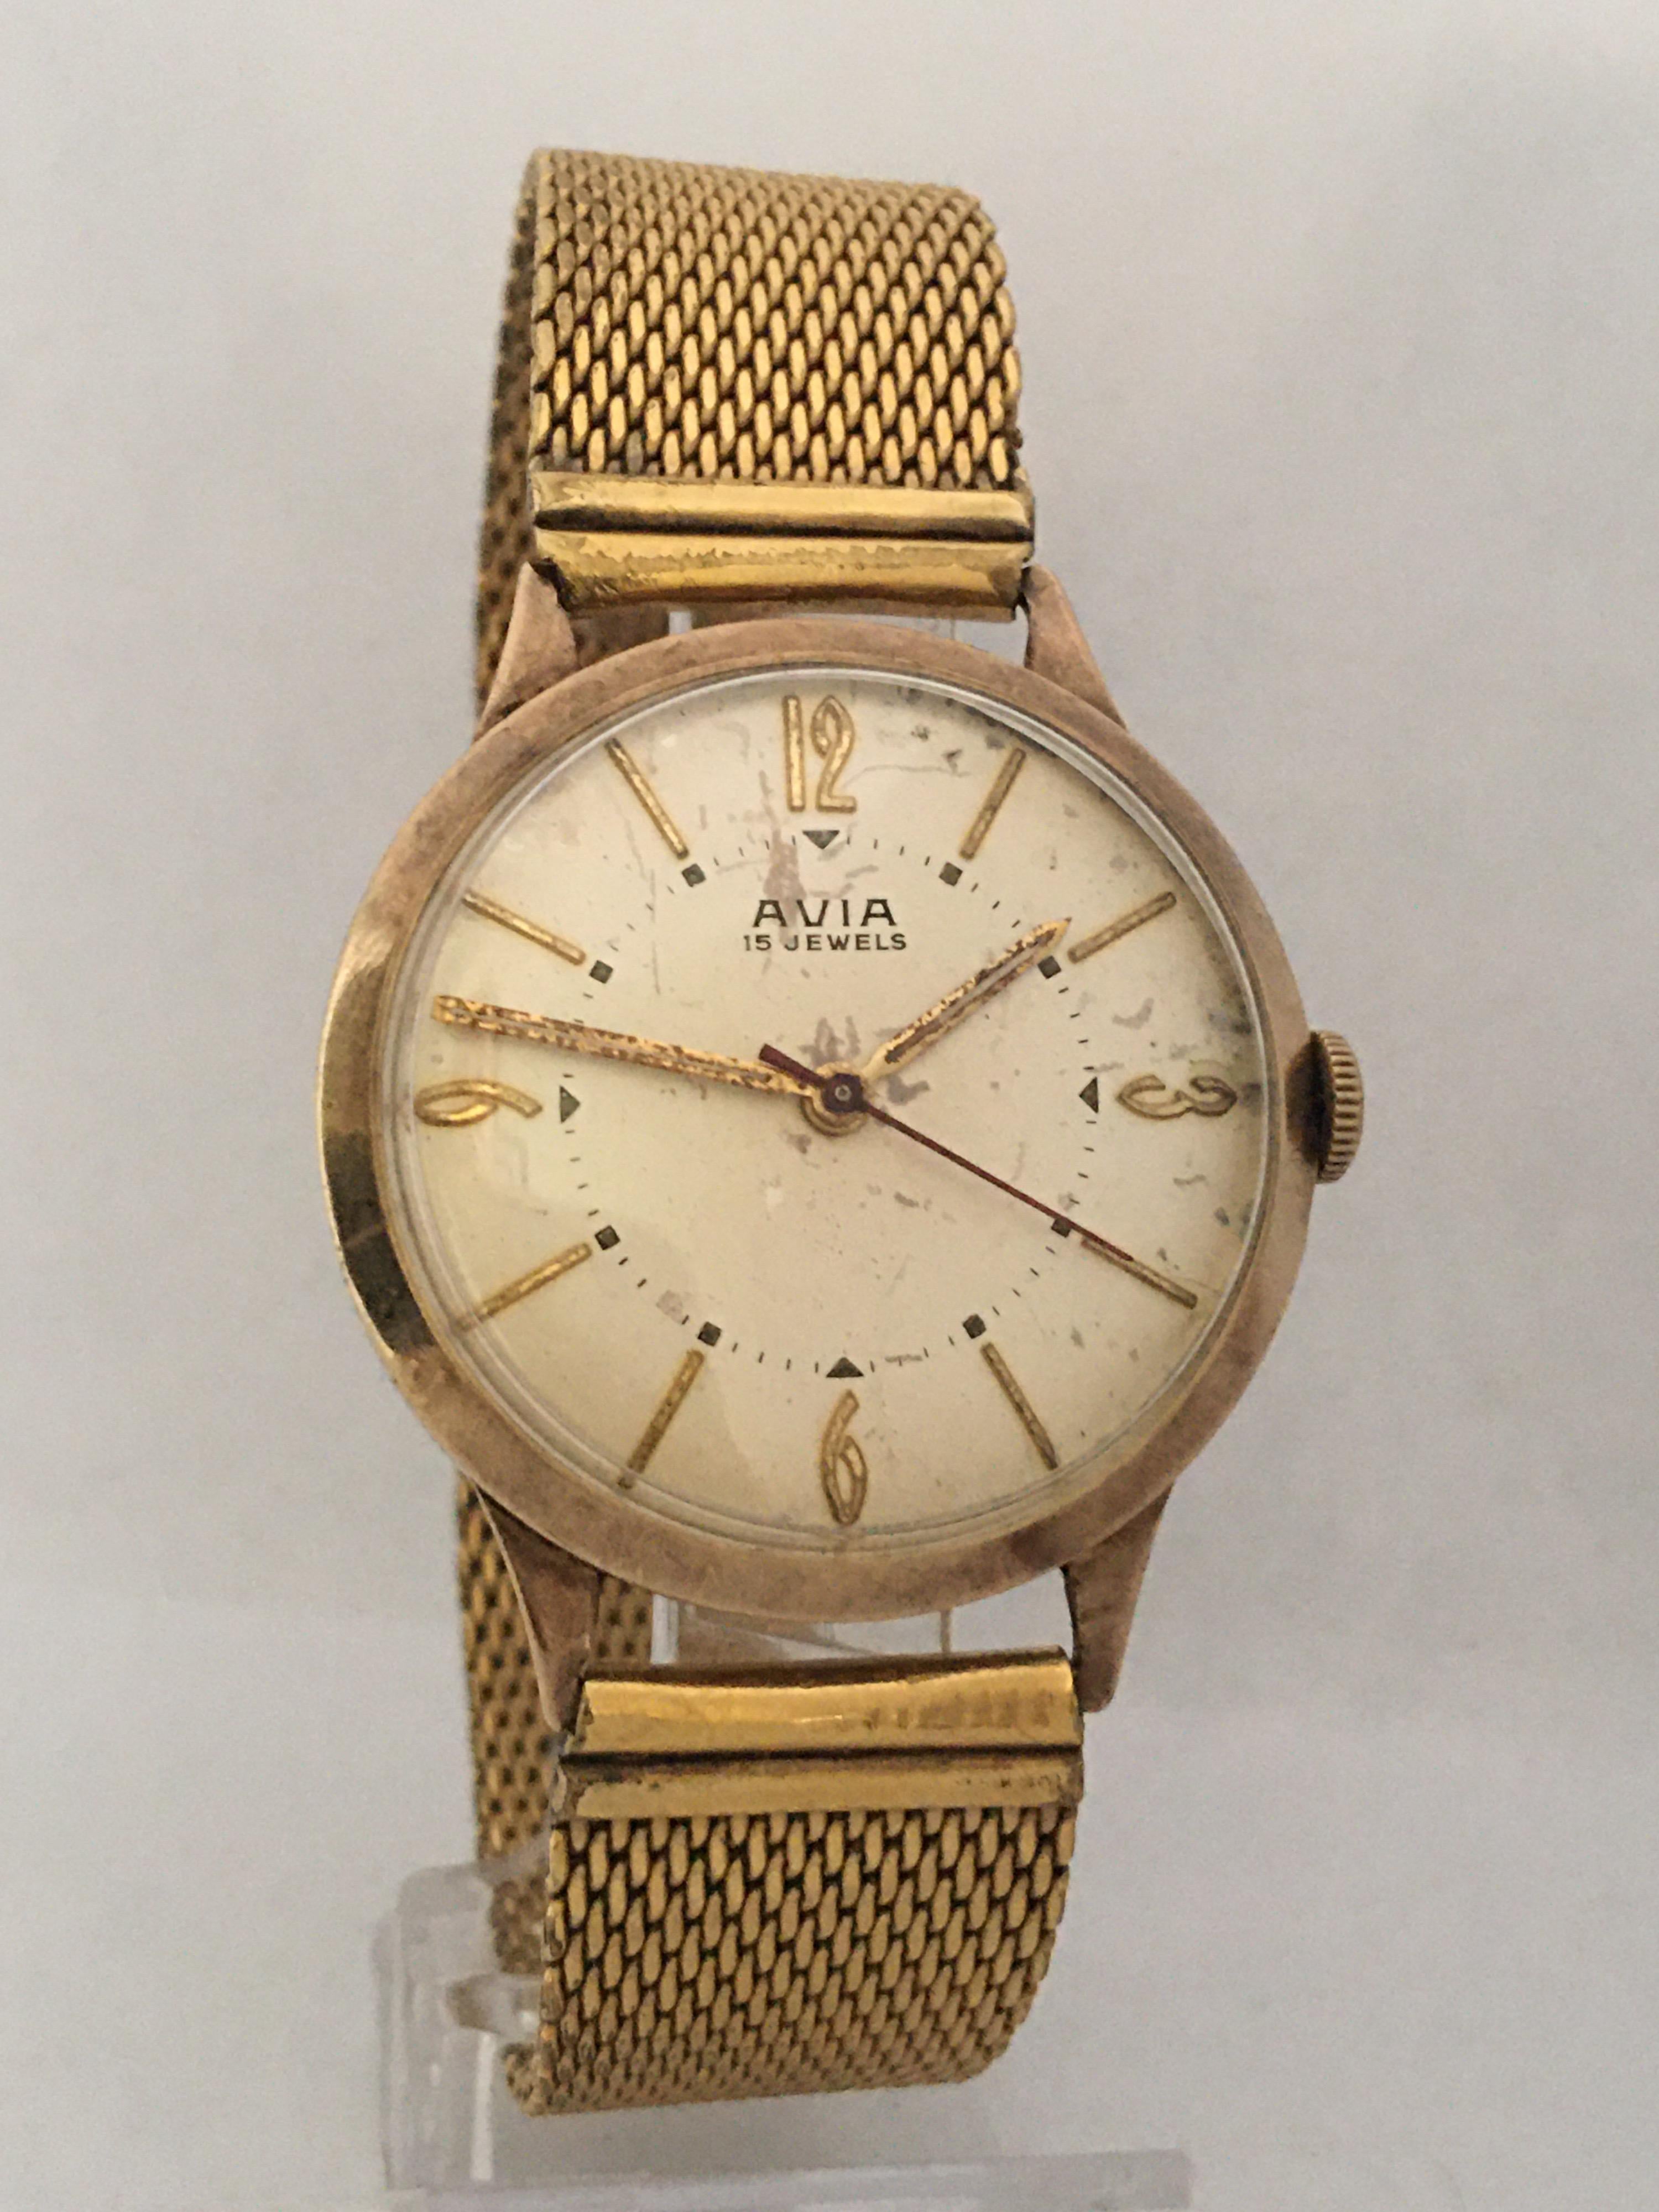 This beautiful pre-owned 34mm diameter (excluding crown) vintage hand winding gold watch is in good working condition. It recently been serviced and it is running well. Visible signs of ageing and wear with light scratches and dents on the gold